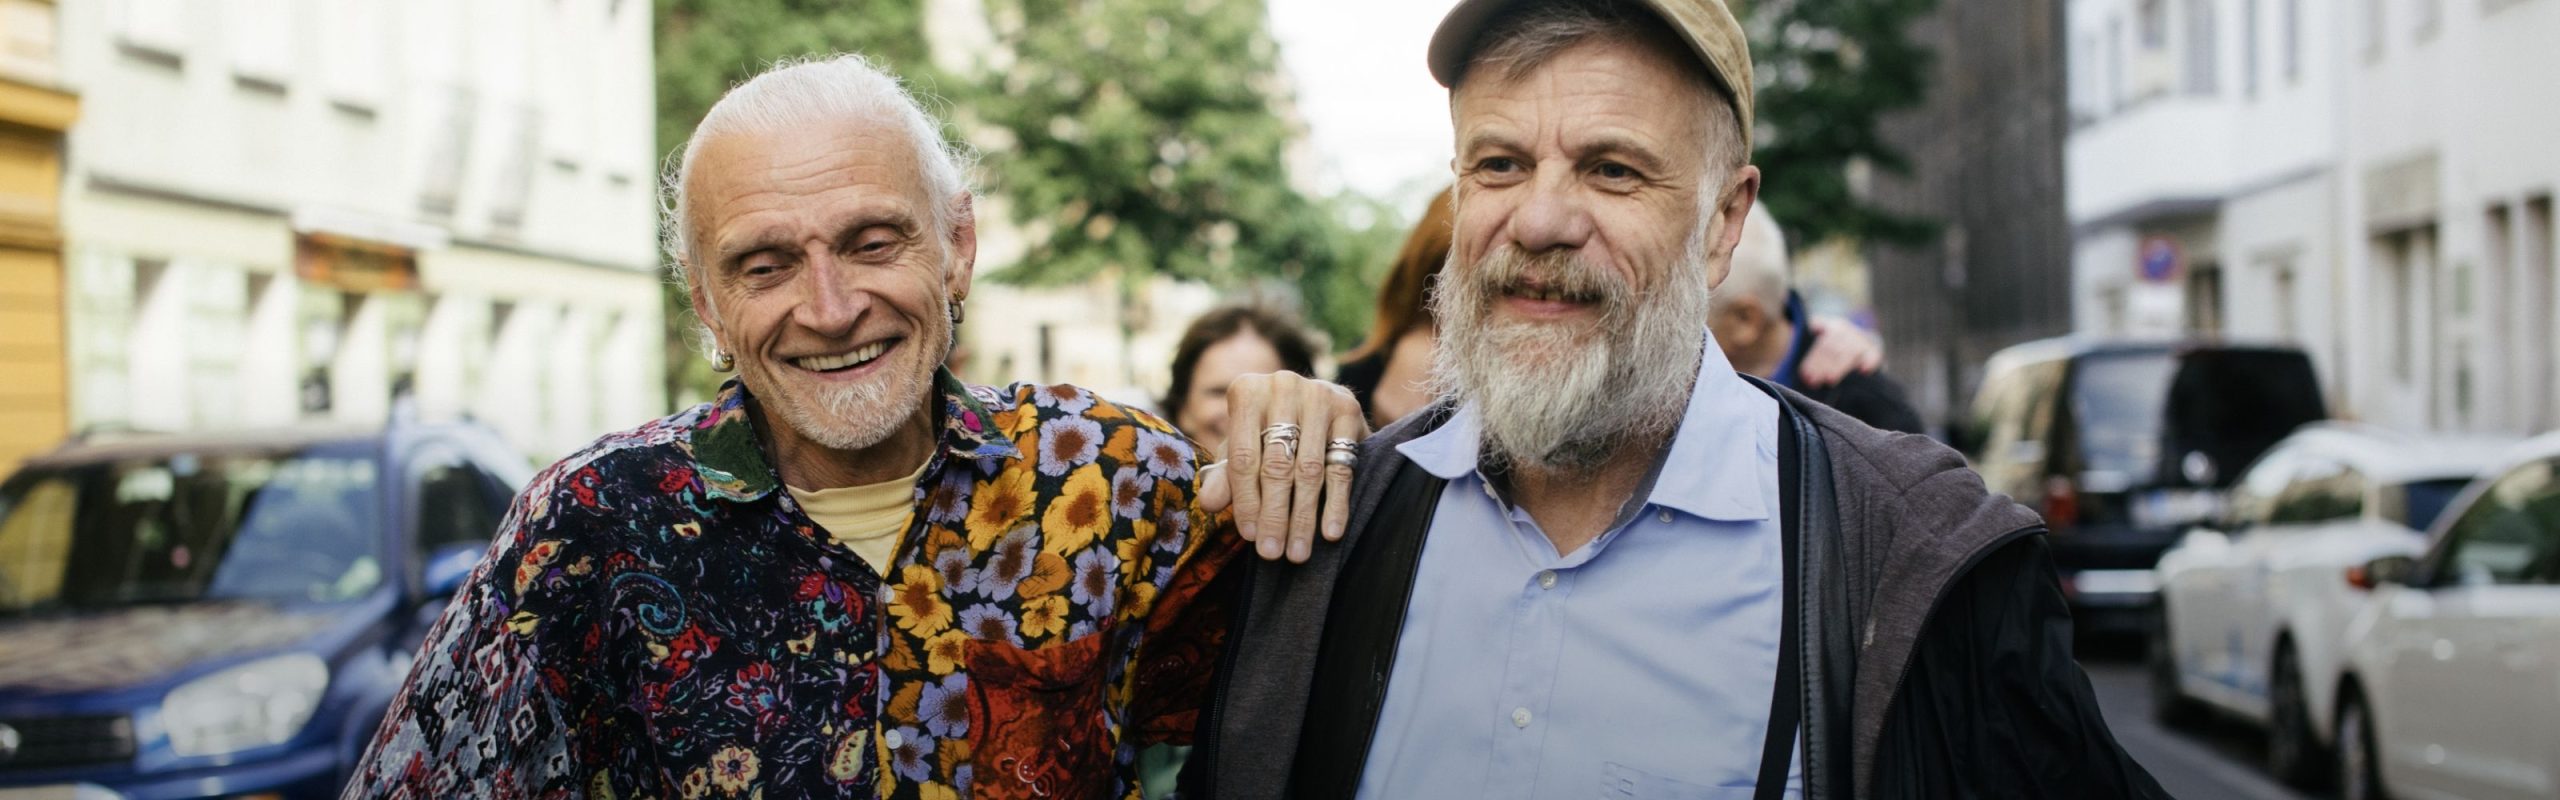 Two older adult men smiling arm in arm on a street